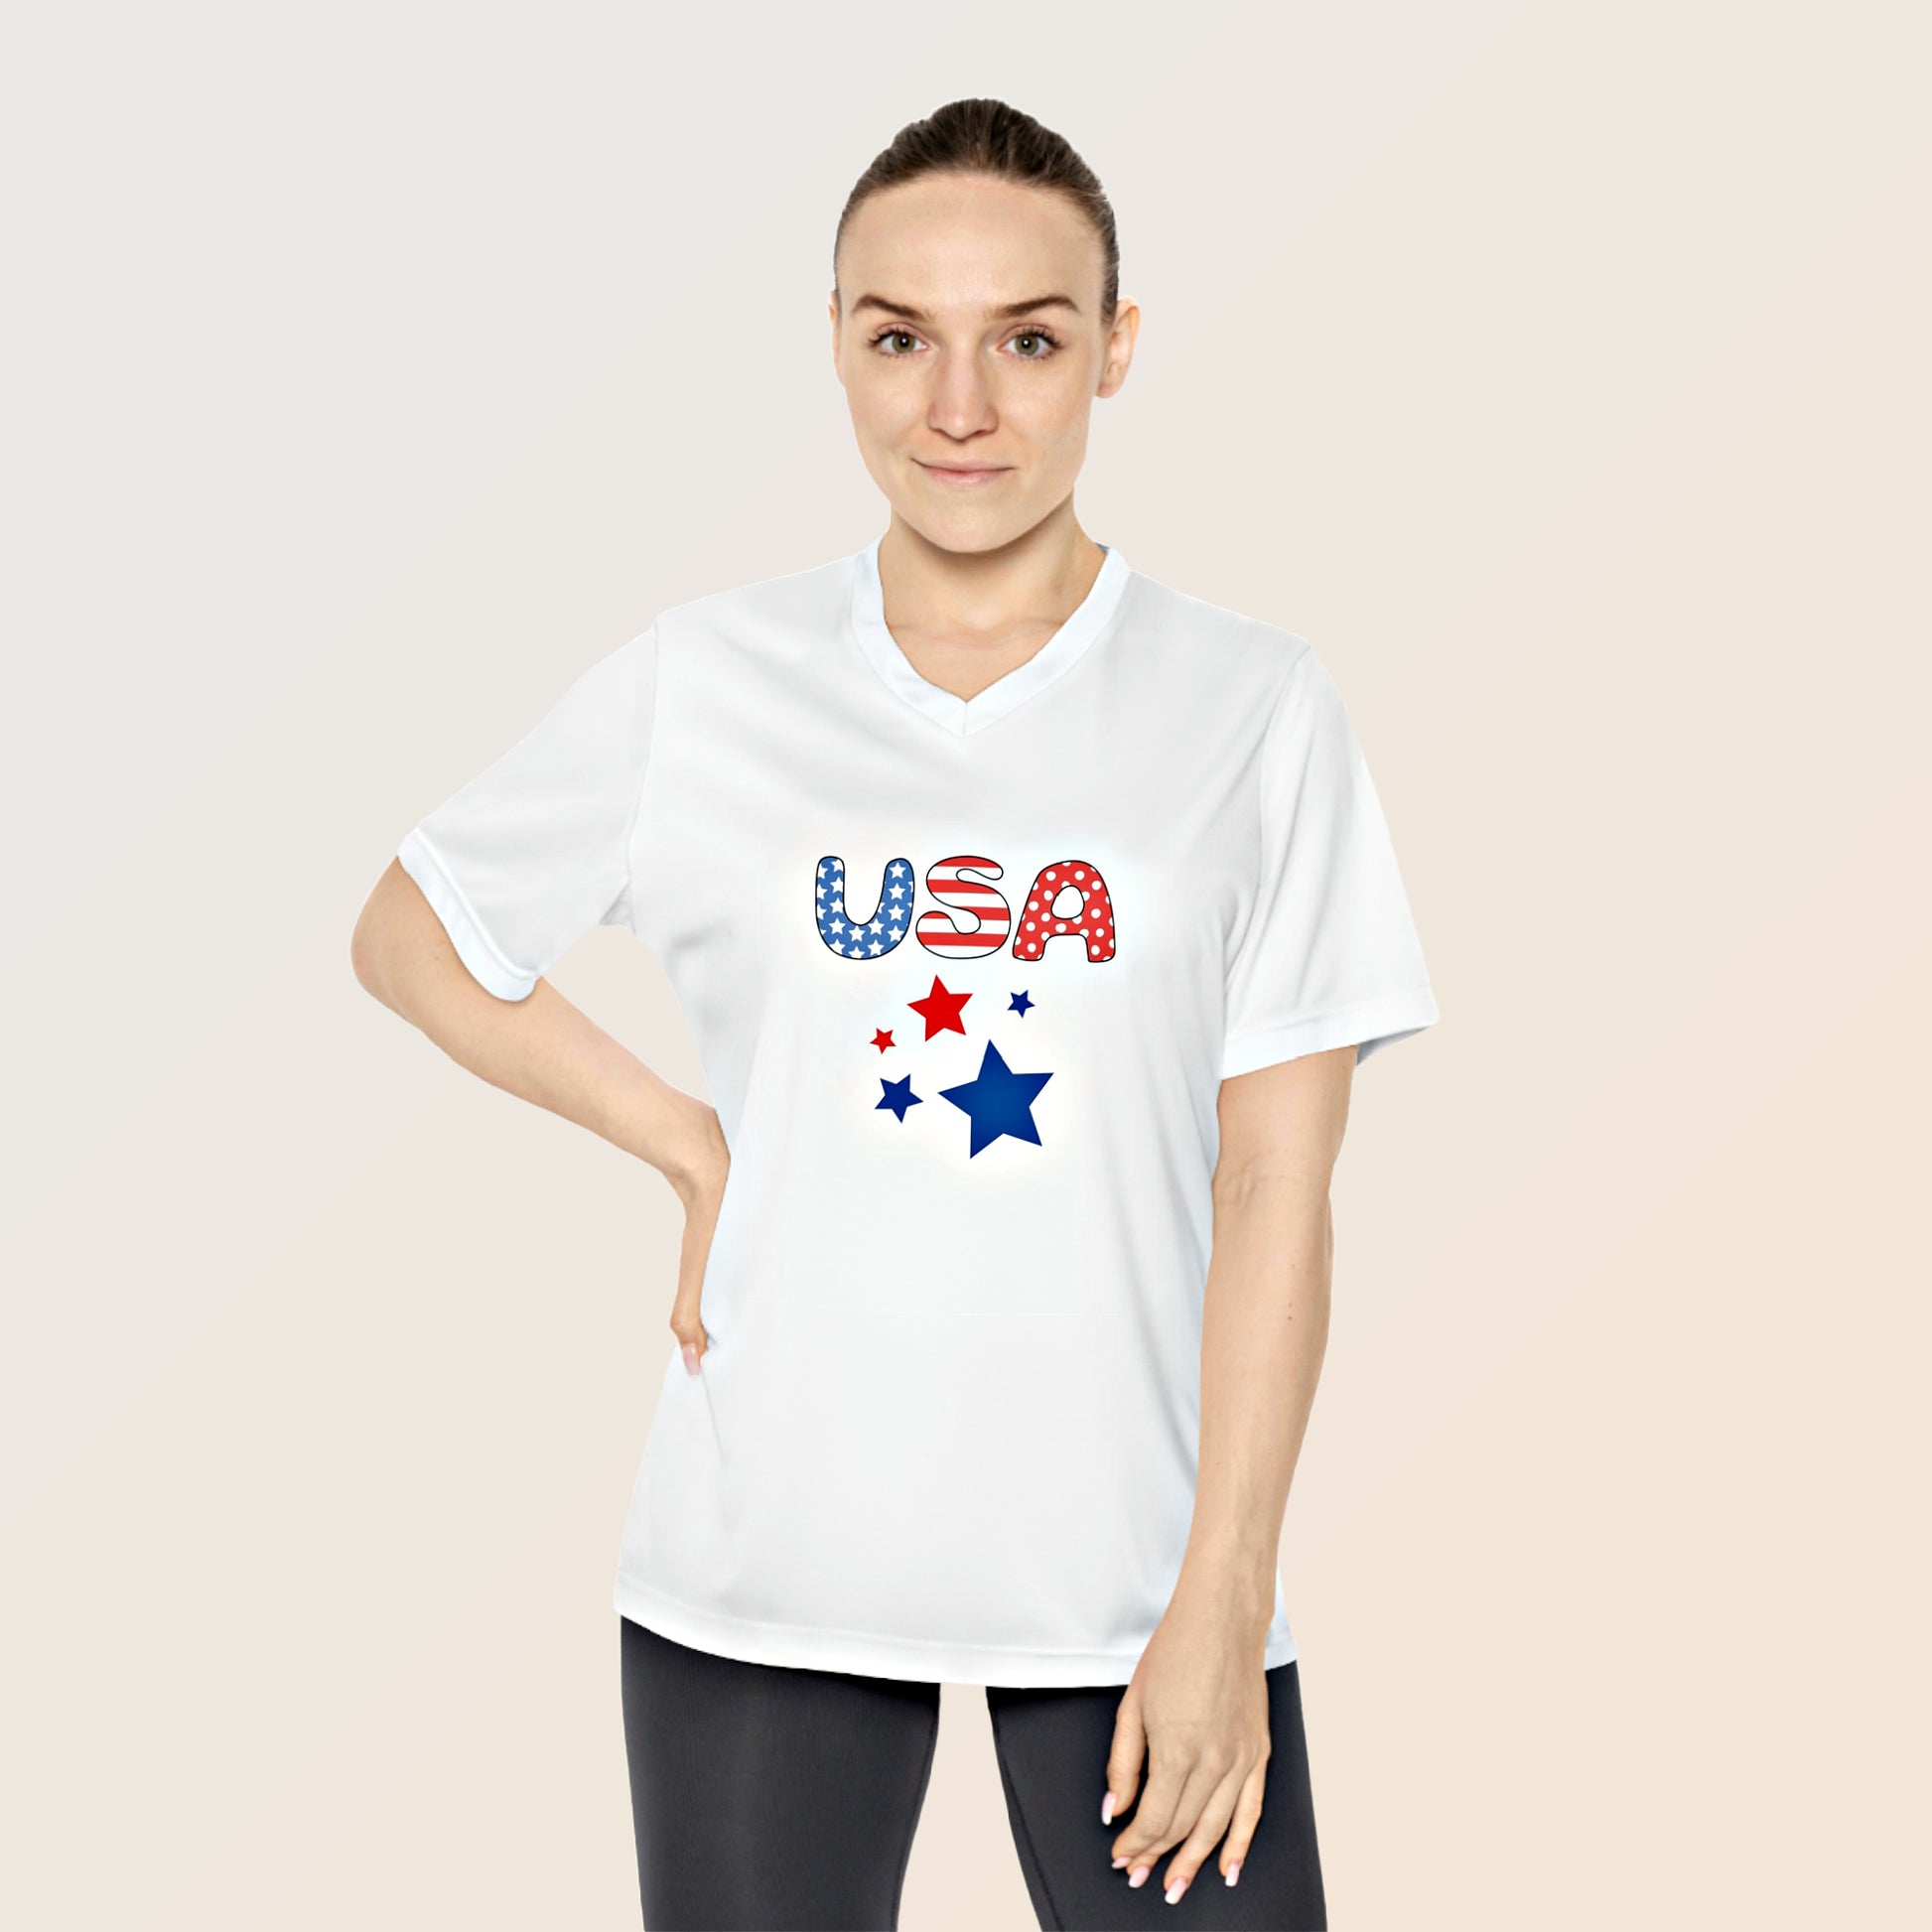 Mock up of a woman wearing our White t-shirt